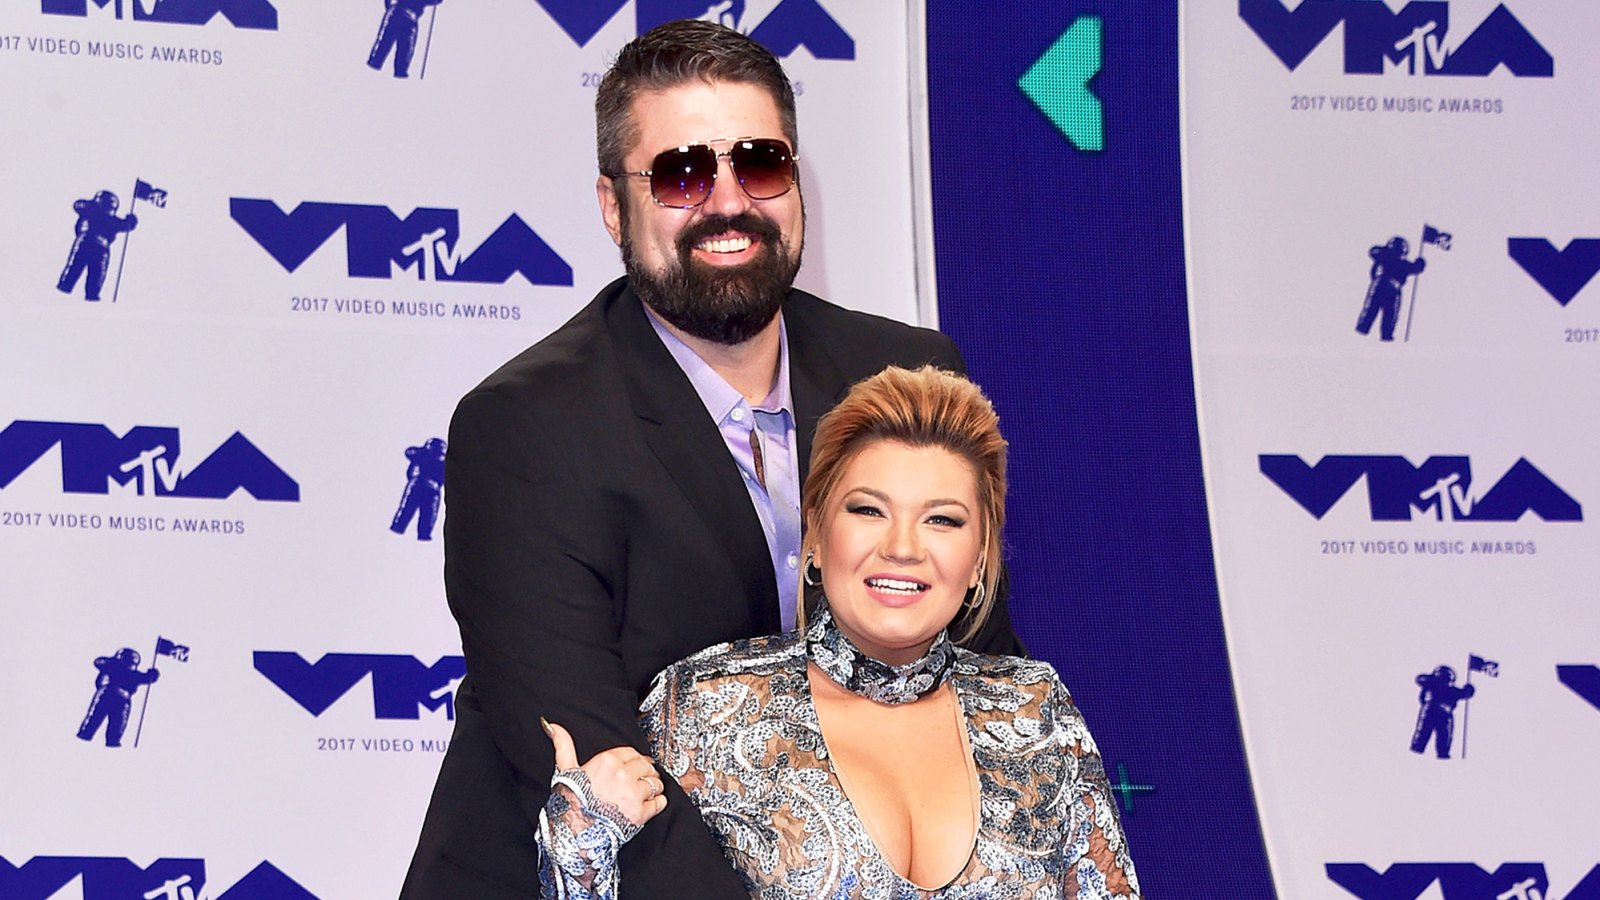 Andrew Glennon and Amber Portwood attend the 2017 MTV Video Music Awards at The Forum in Inglewood, California.